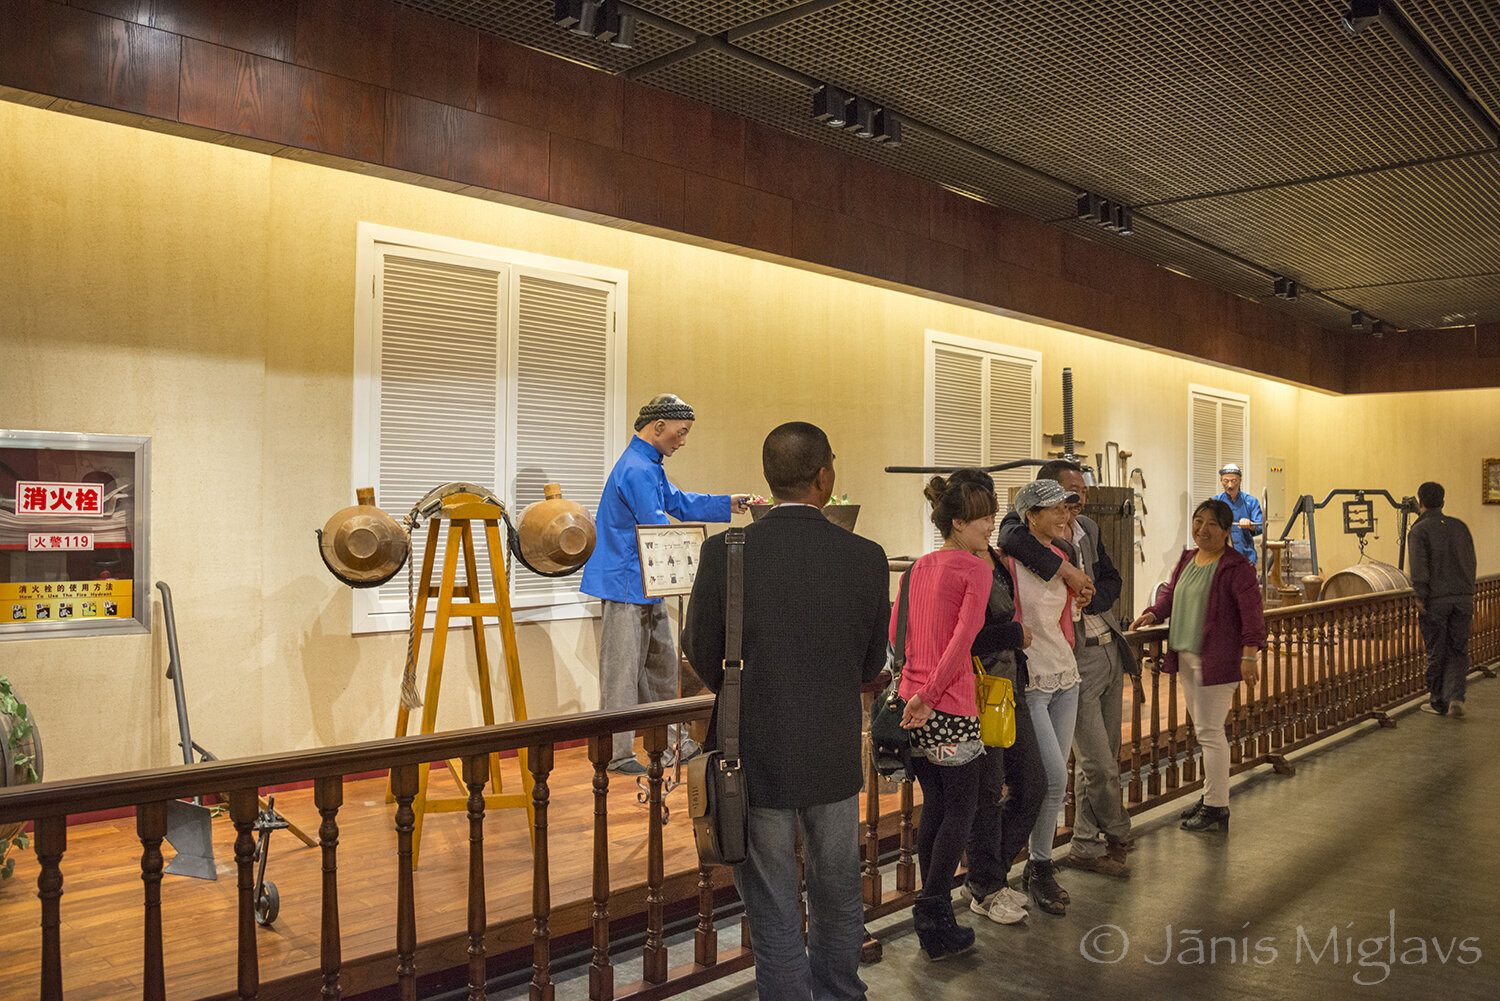 Chinese  tourists seem more interested in selfies than the winery displays.